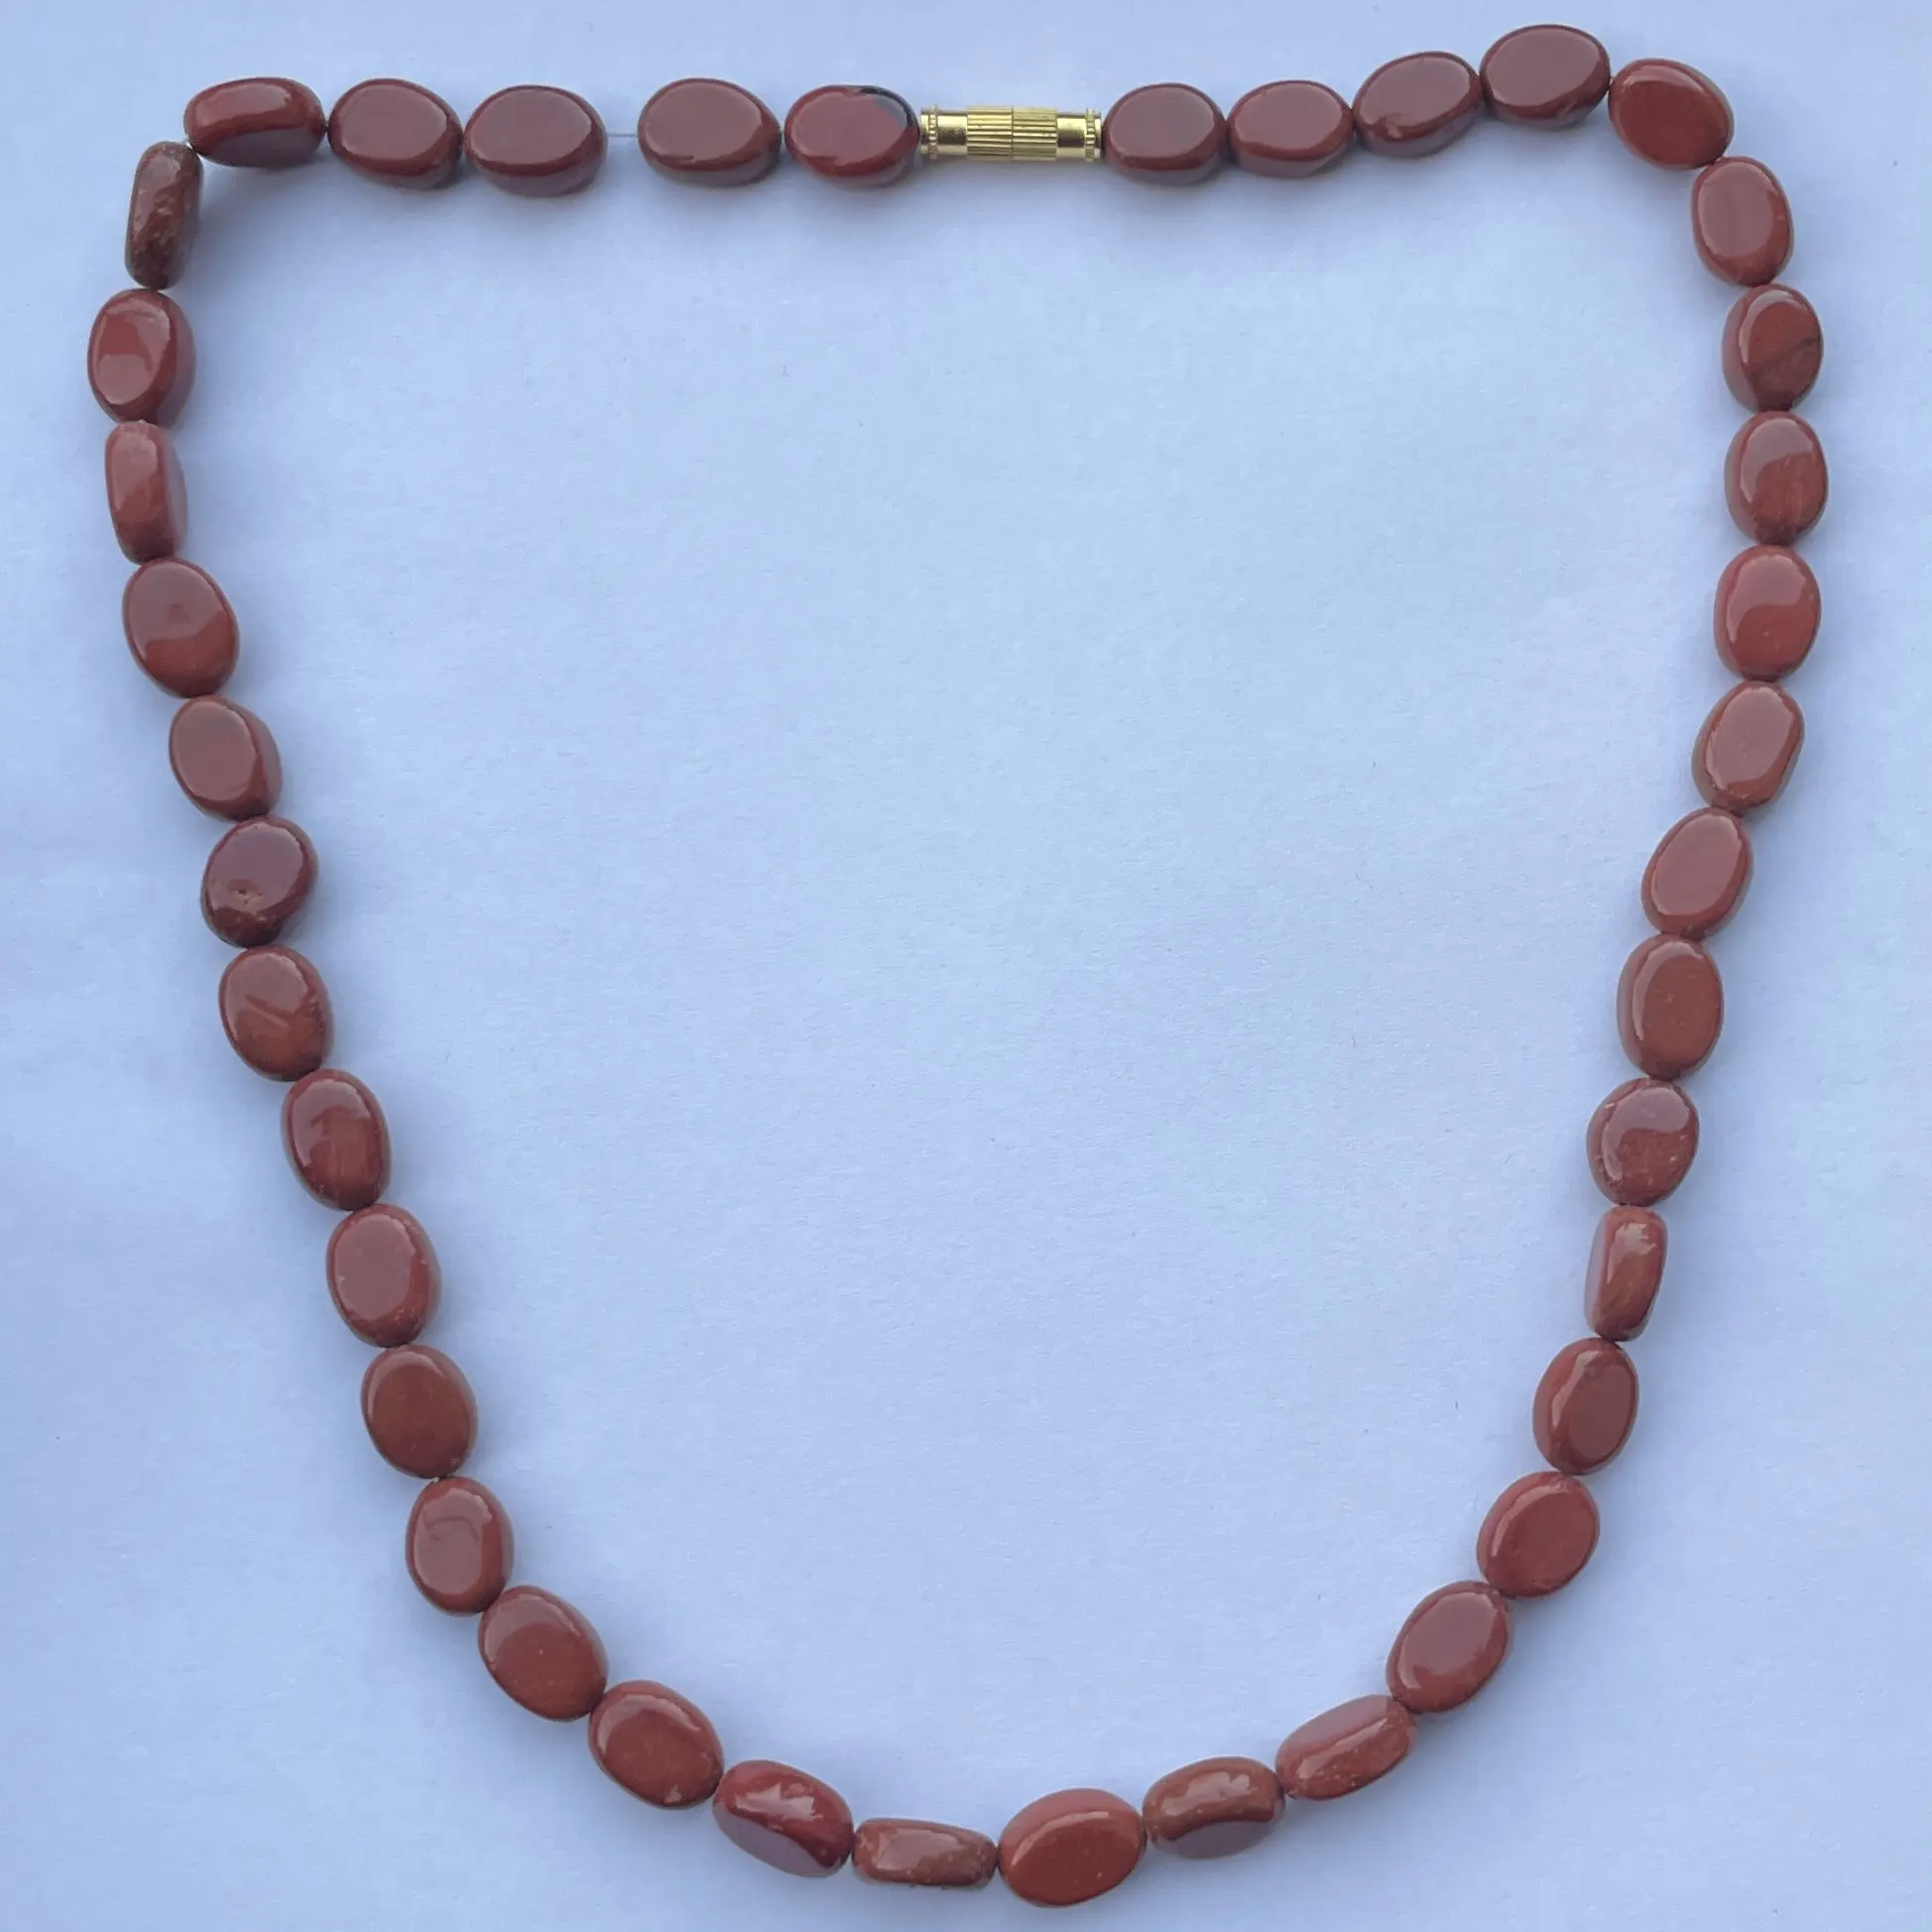 8mm Natural Red Jasper Smooth Oval Gemstone Beads Necklace Jewelry Semi Precious Online Sale Store Latest Alibaba Collection New